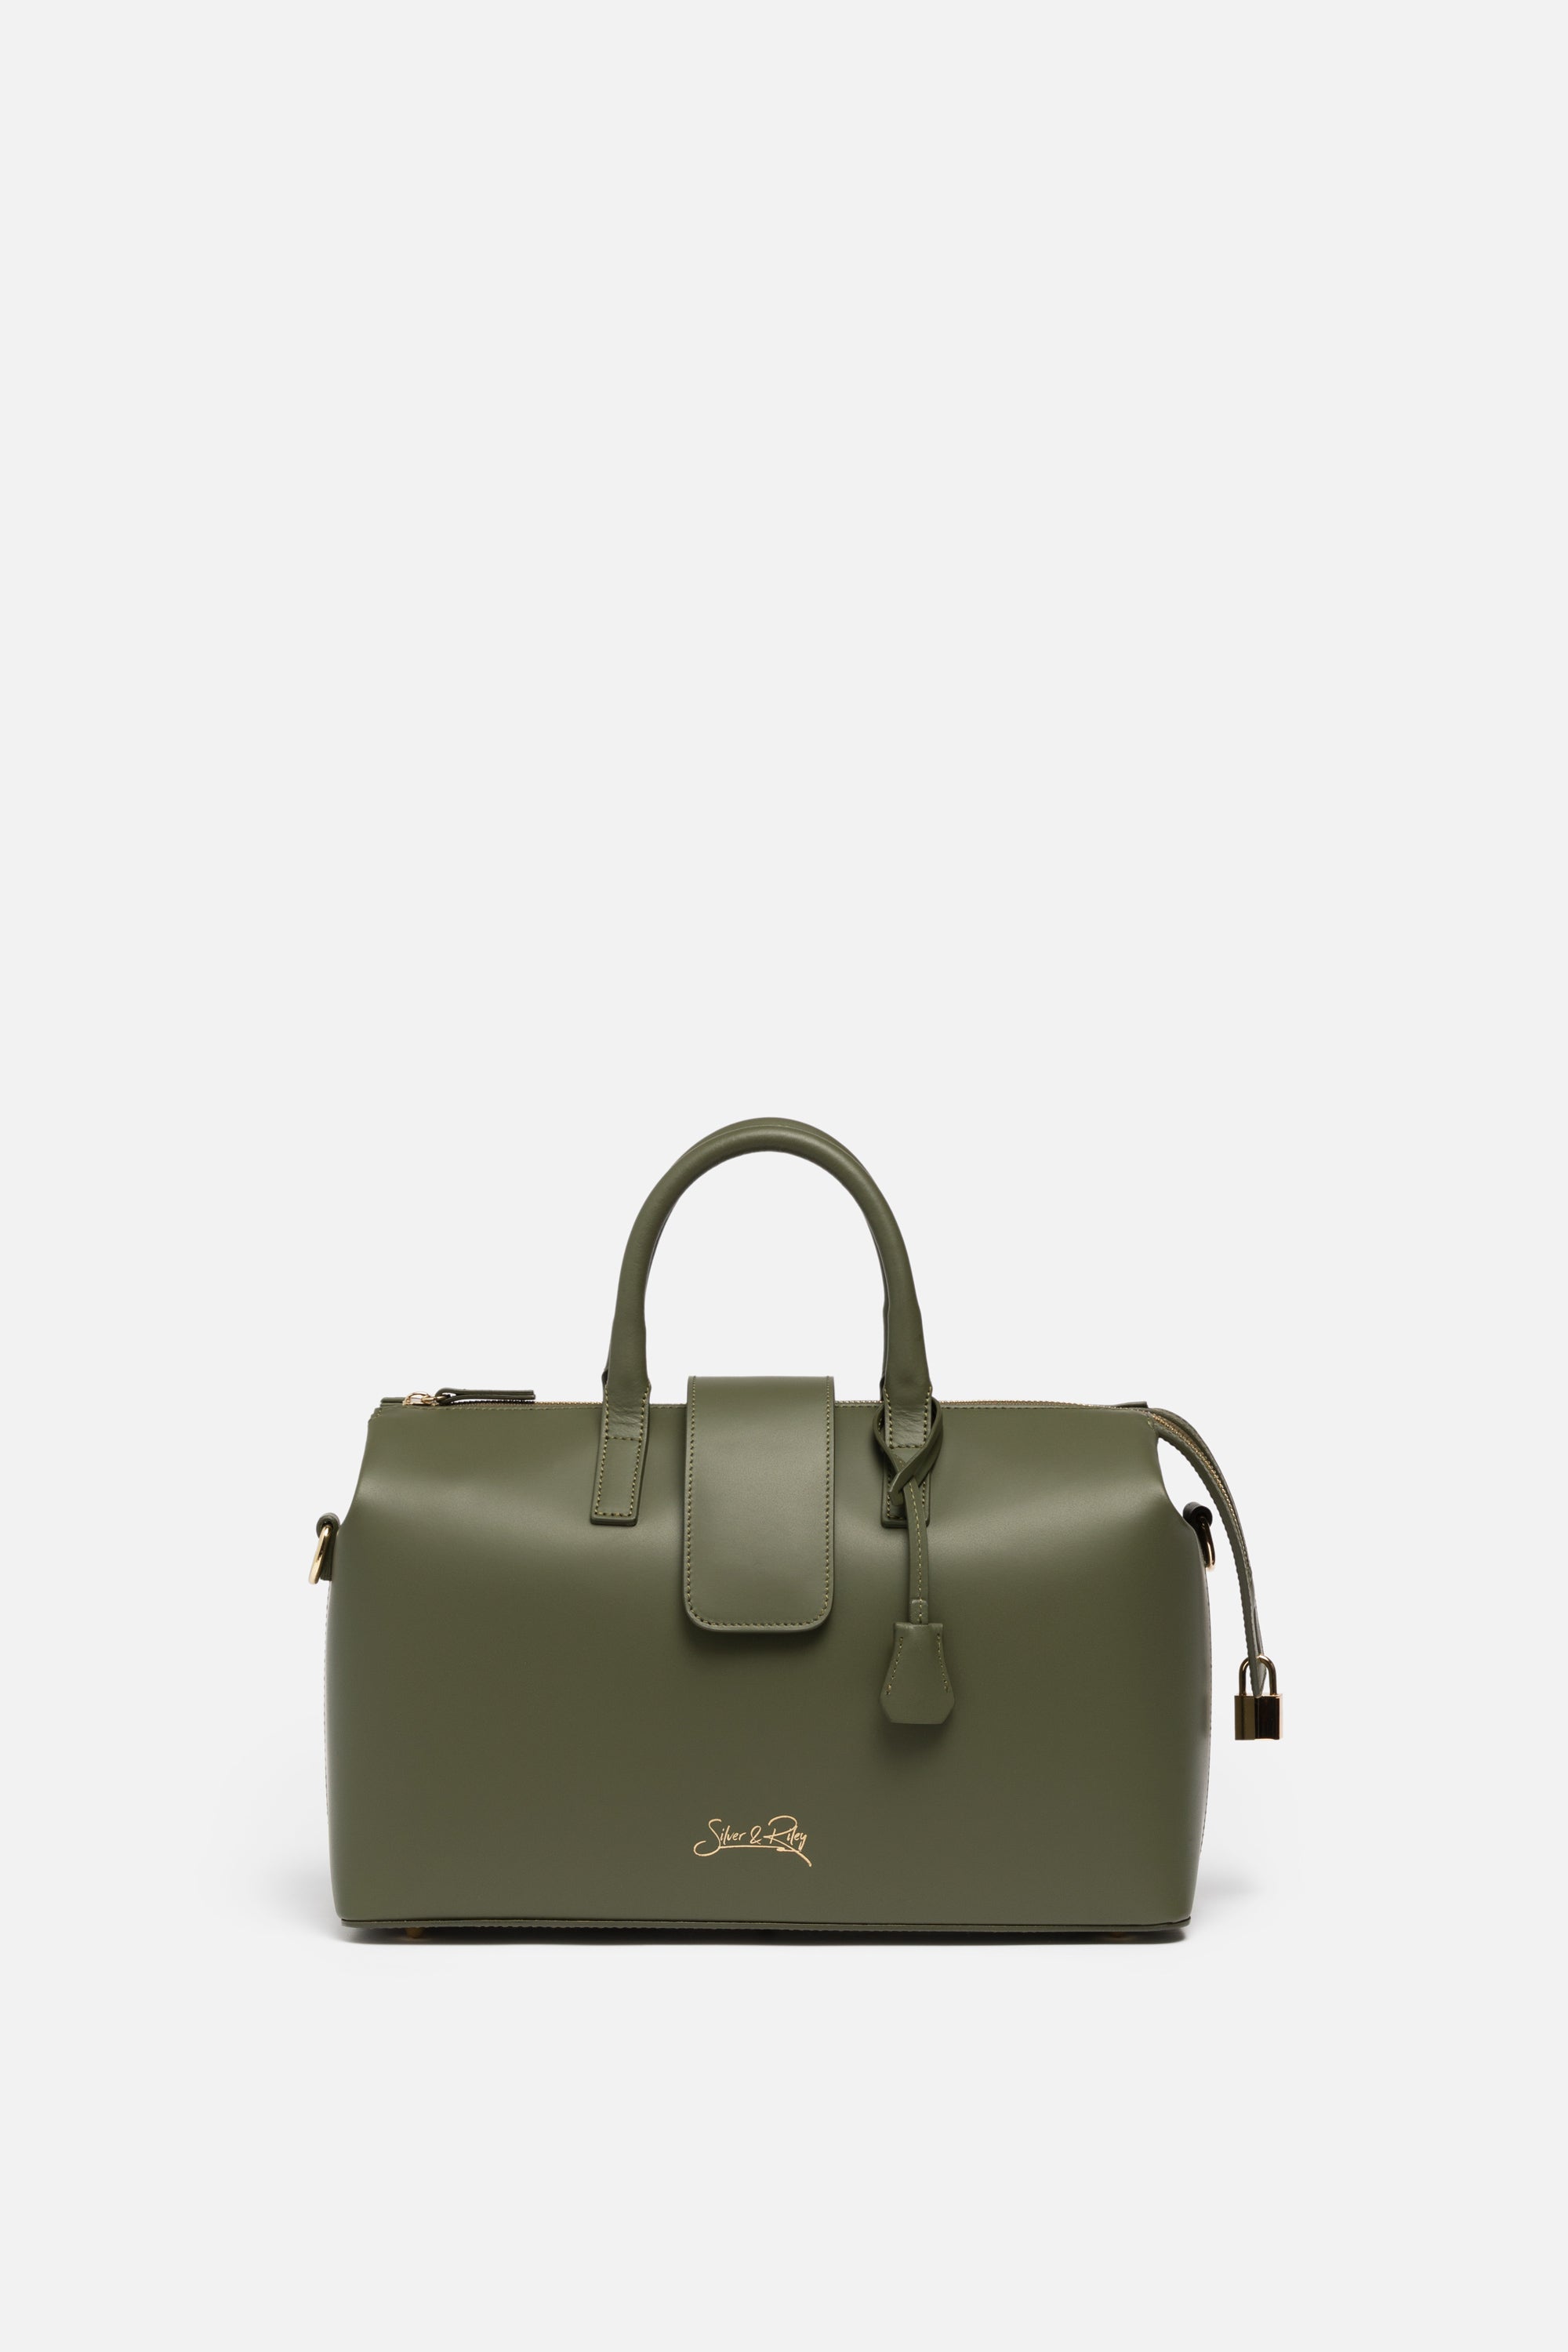 Silver & Riley Convertible Executive Bag in Olive Green